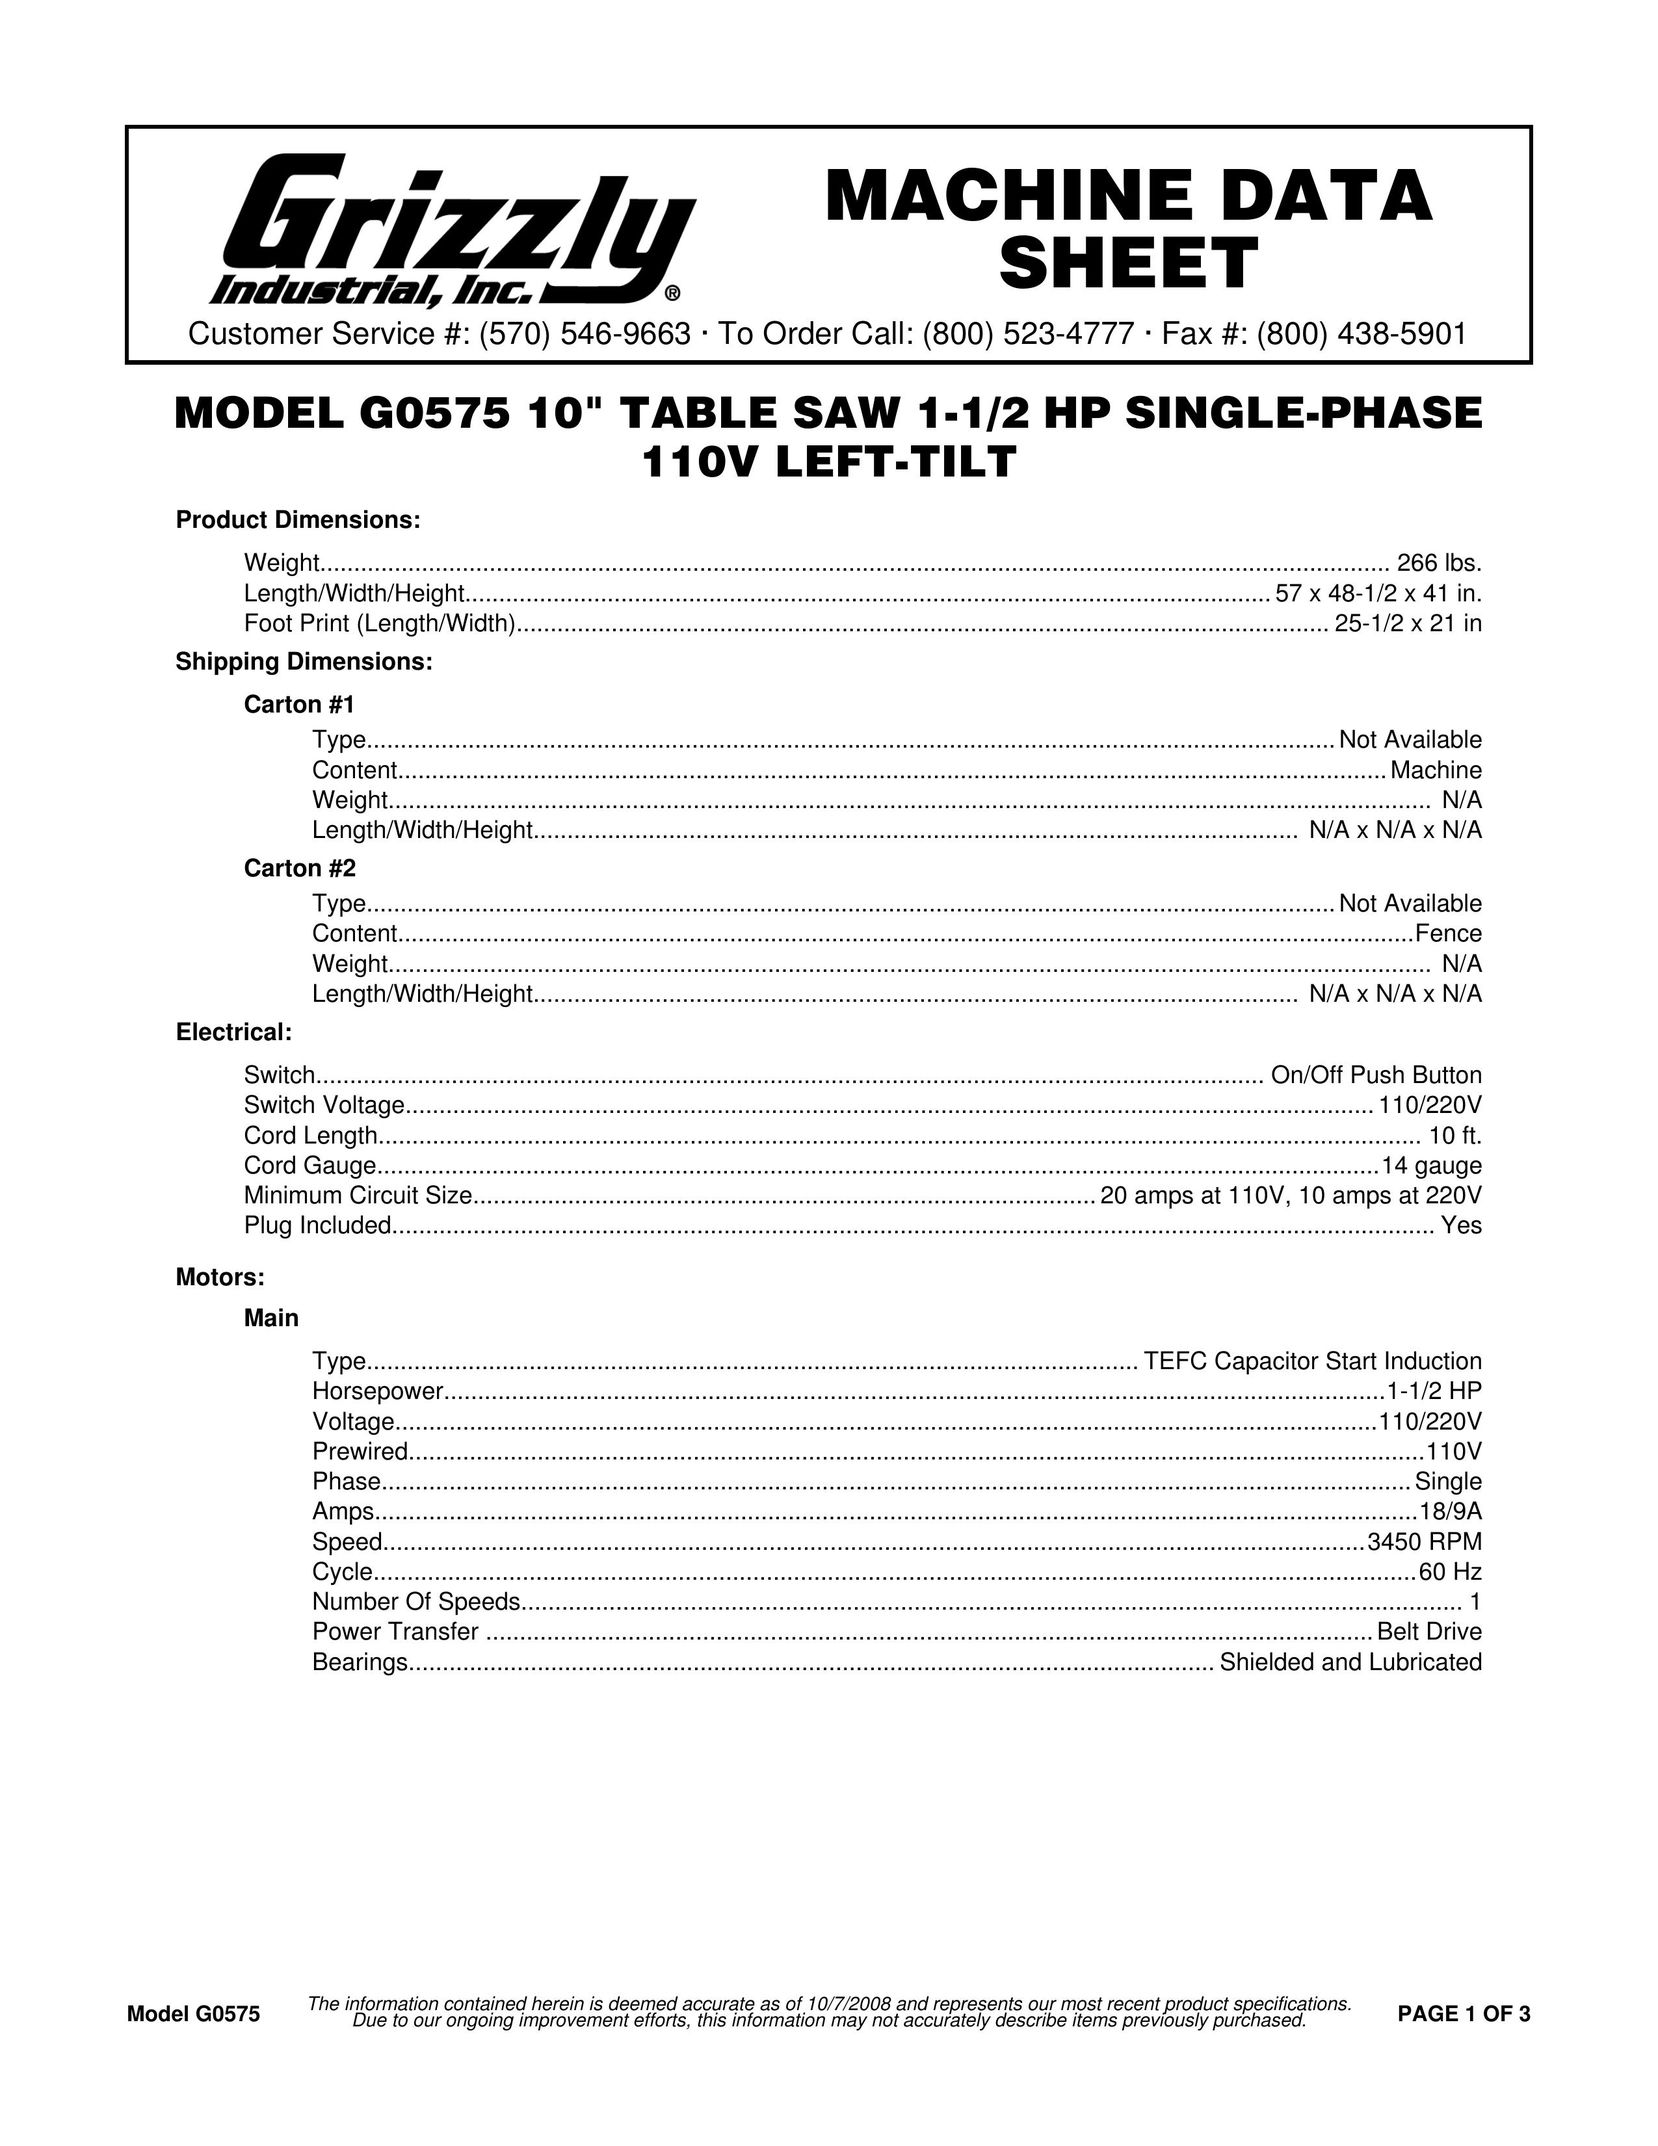 Grizzly G0575 Saw User Manual